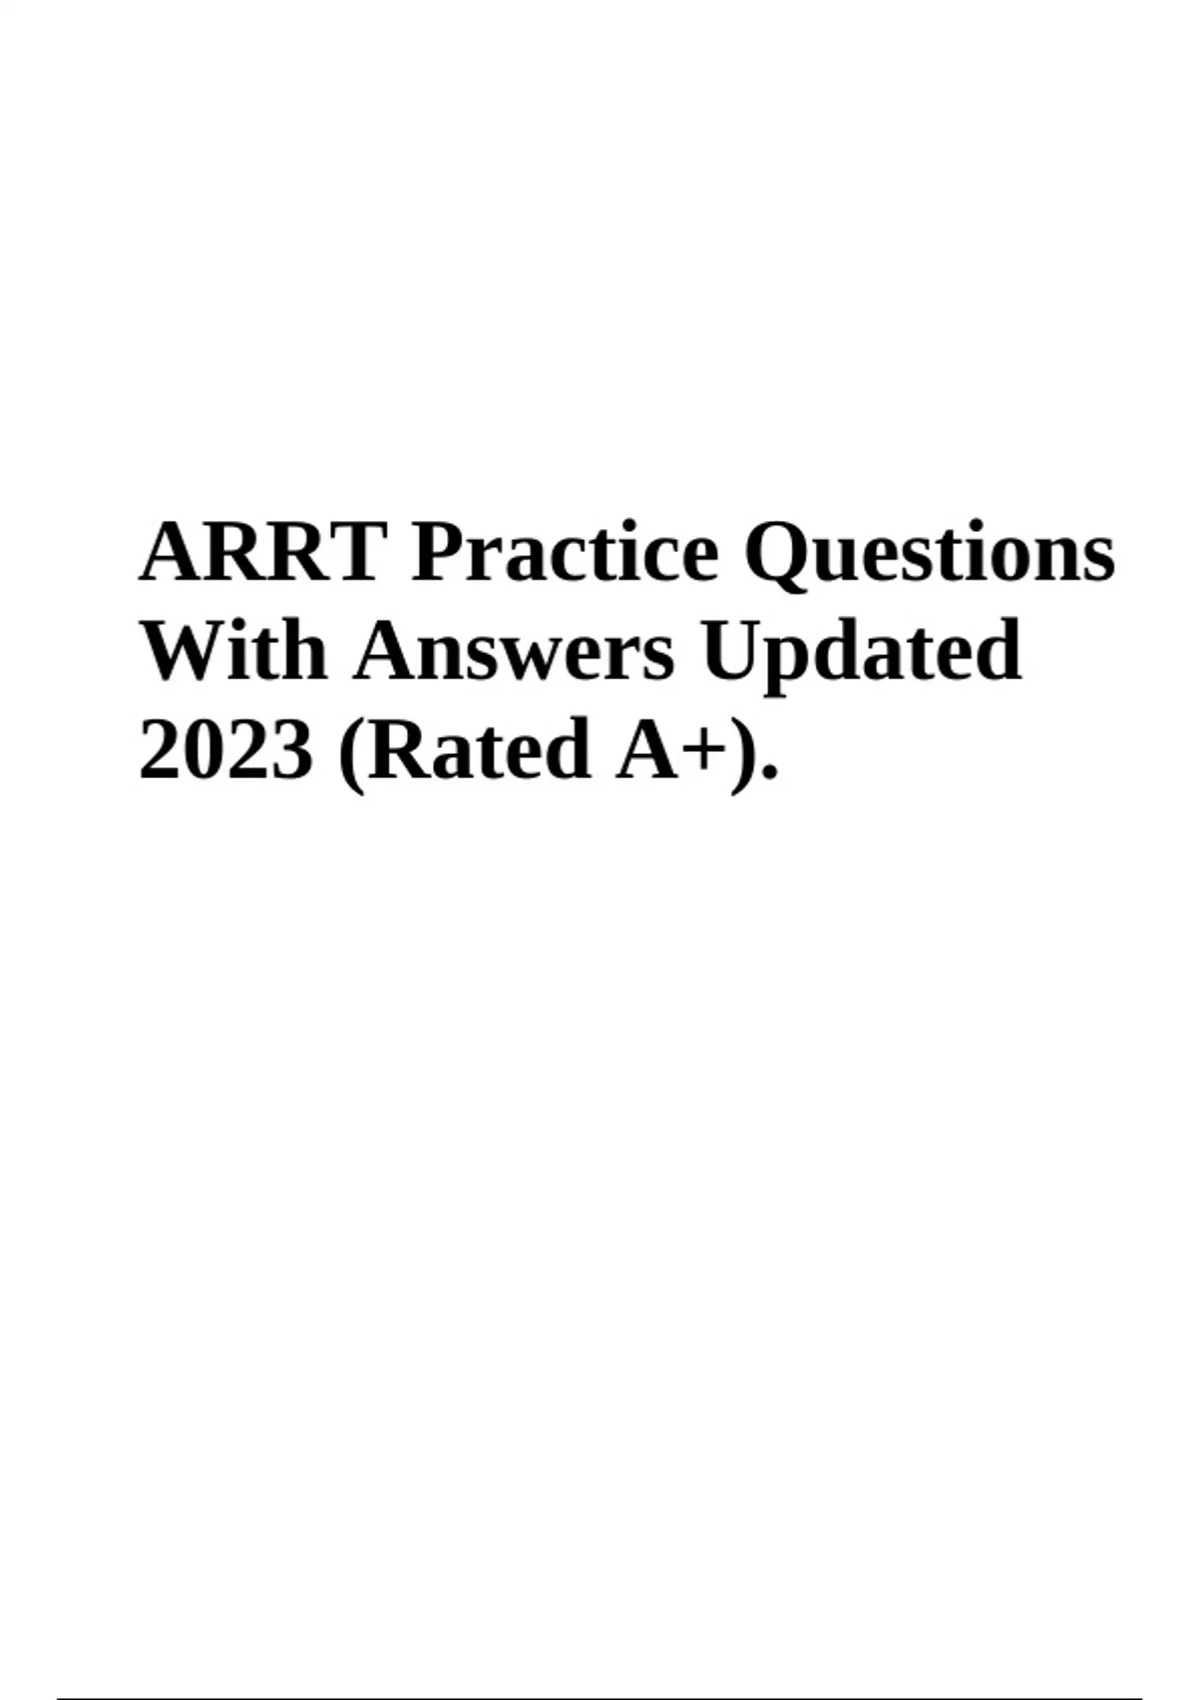 ARRT Exam Practice Questions With Answers Latest Updated 2023/2024